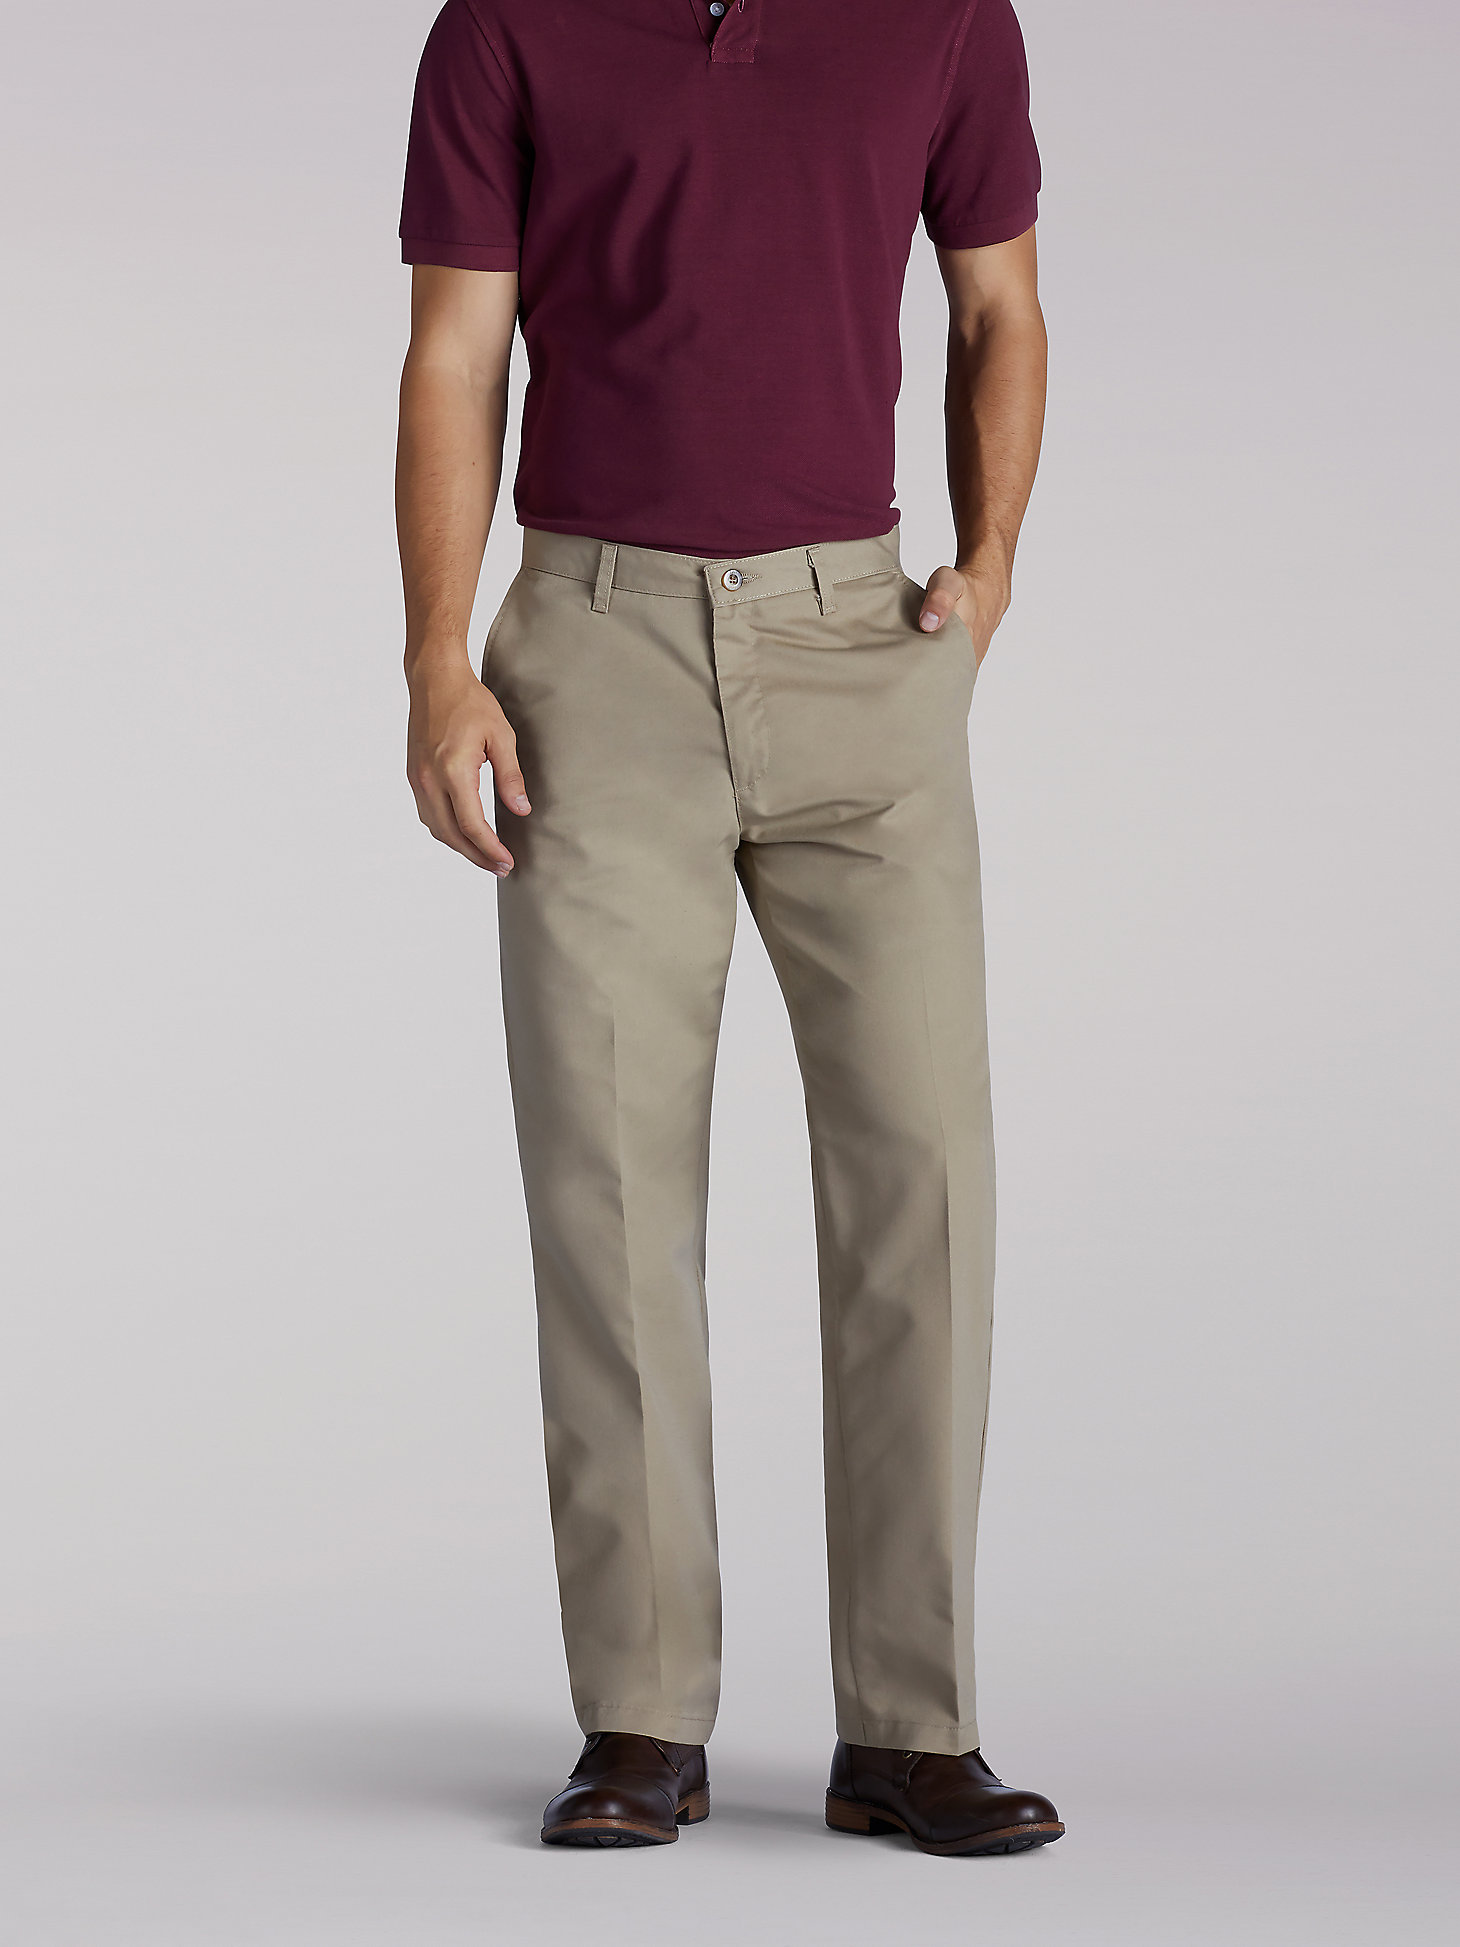 Men’s Total Freedom Flat Front Pants in Khaki Twill main view